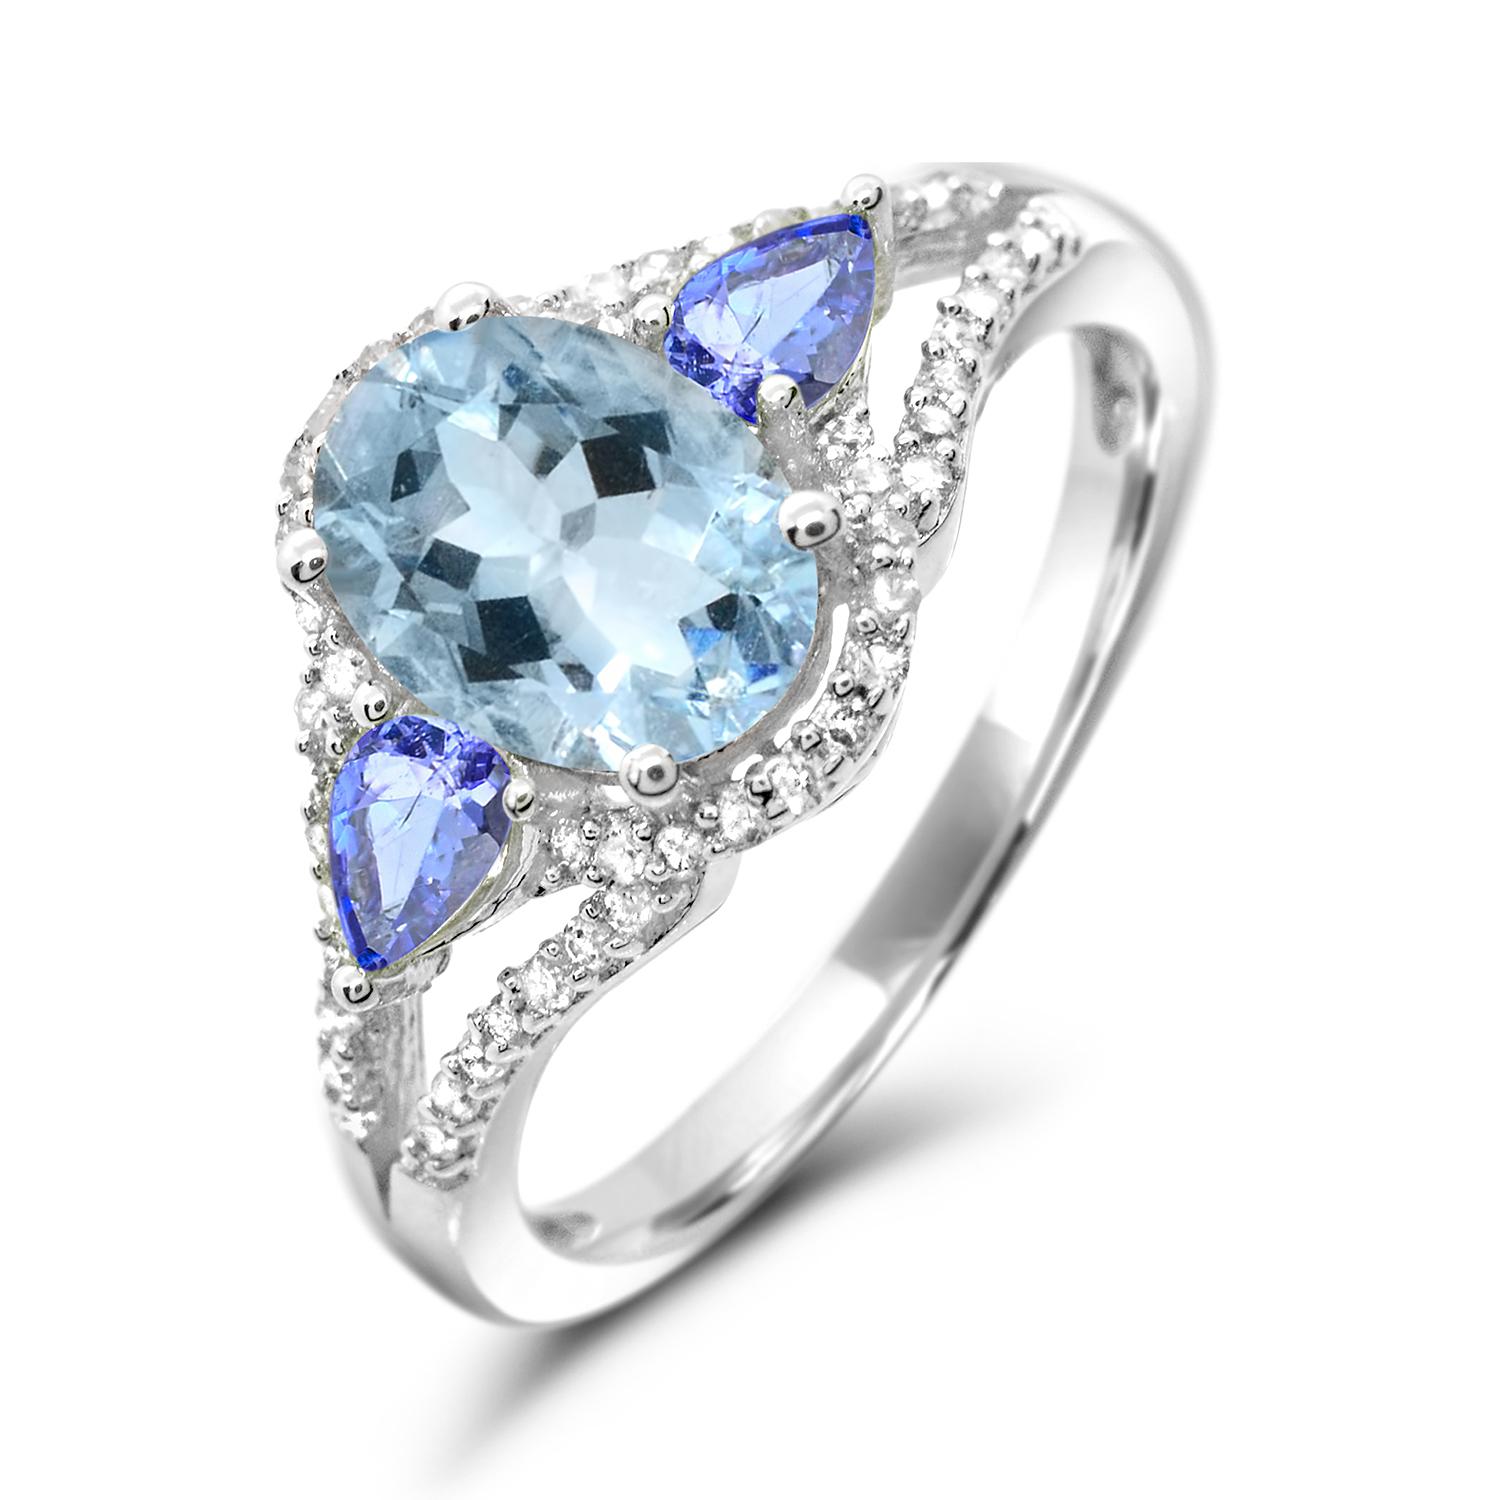 Indulge in the elegance of our Oval-Cut Aquamarine and Pear-Cut Tanzanite with White Diamond Accented Ring. Crafted with meticulous attention to detail, this ring boasts a stunning combination of Aquamarine and Tanzanite accented by sparkling white